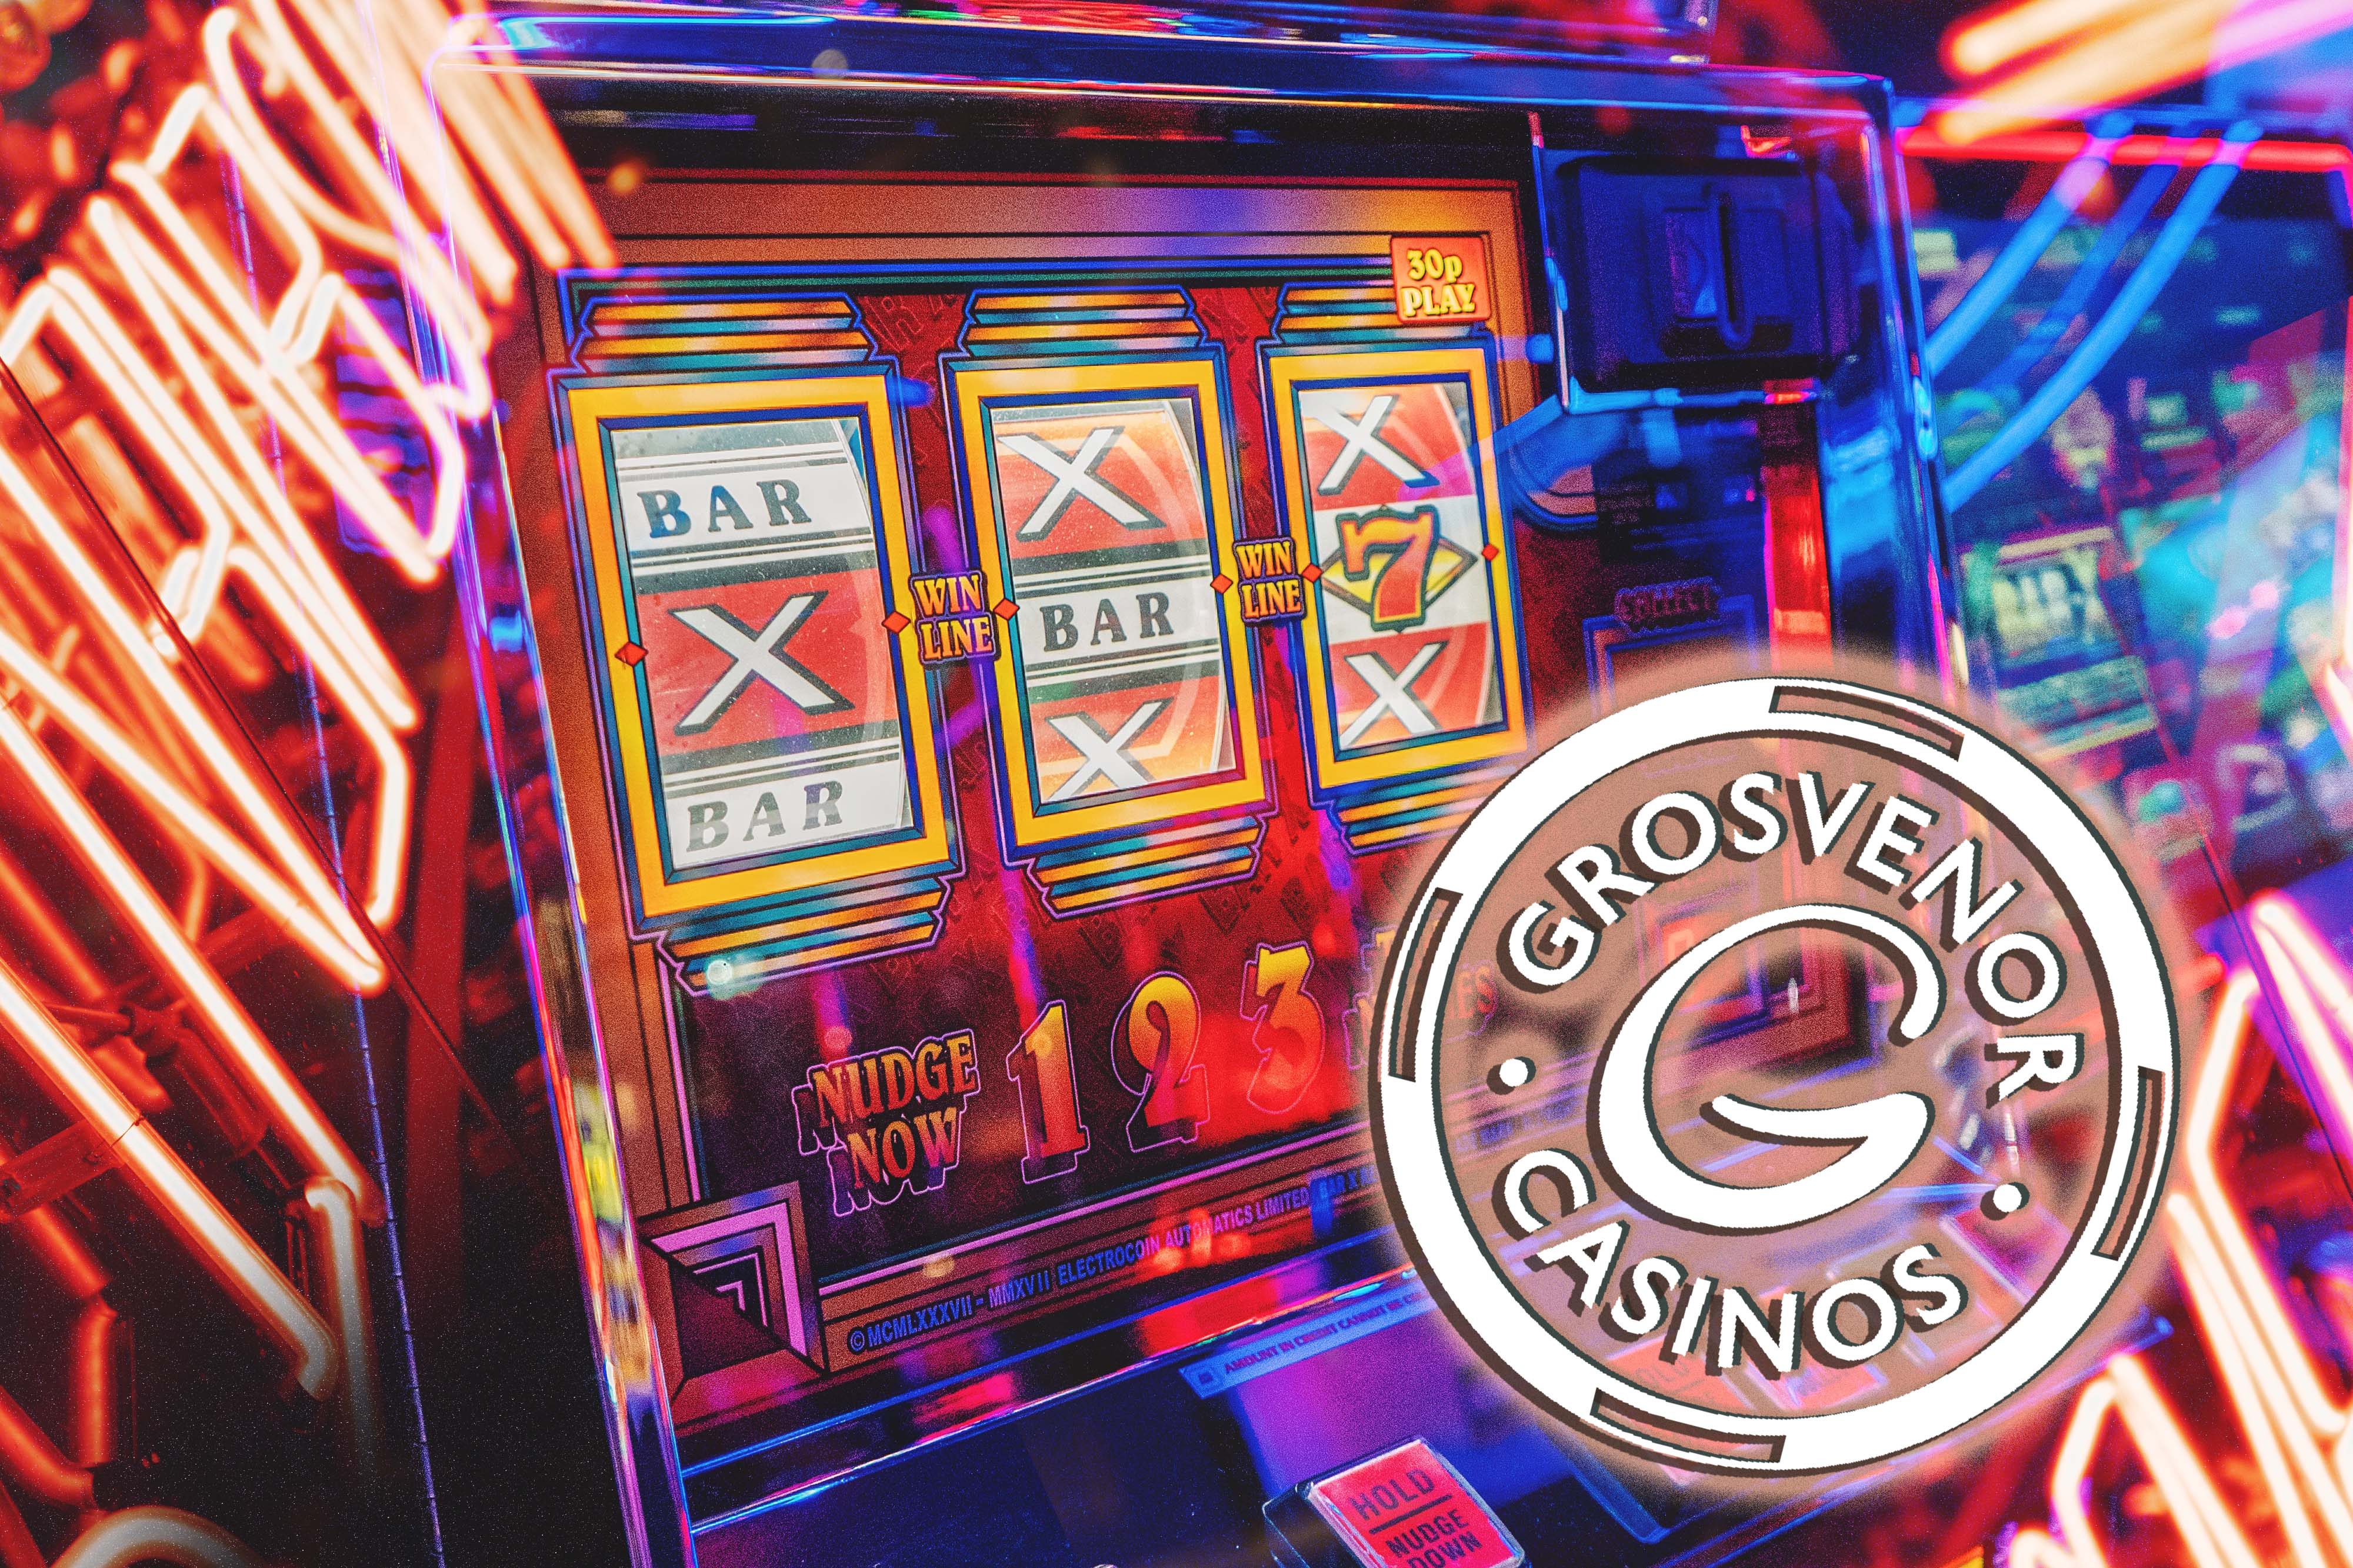 Grosvenor Casino Review, a UK Player’s Perspective